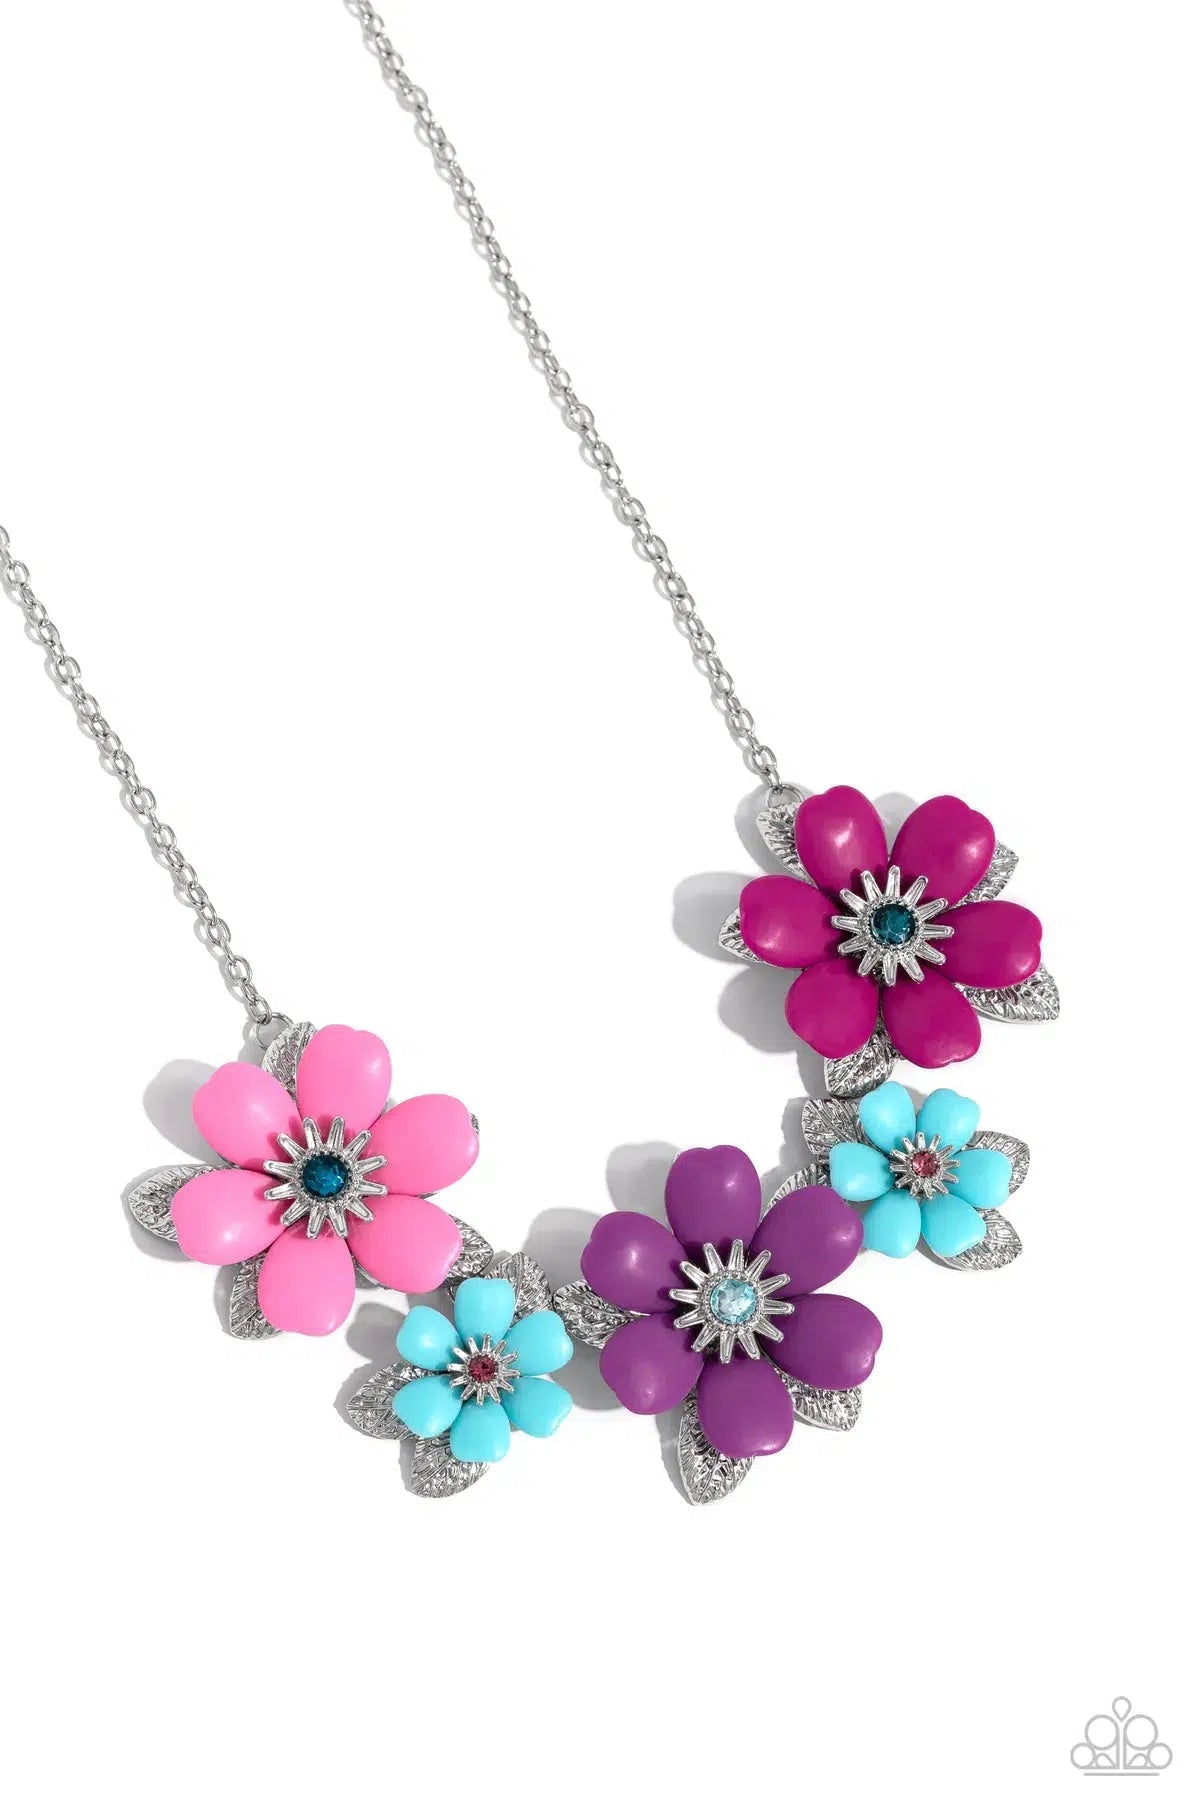 Well-Mannered Whimsy Pink Flower Necklace - Paparazzi Accessories- lightbox - CarasShop.com - $5 Jewelry by Cara Jewels